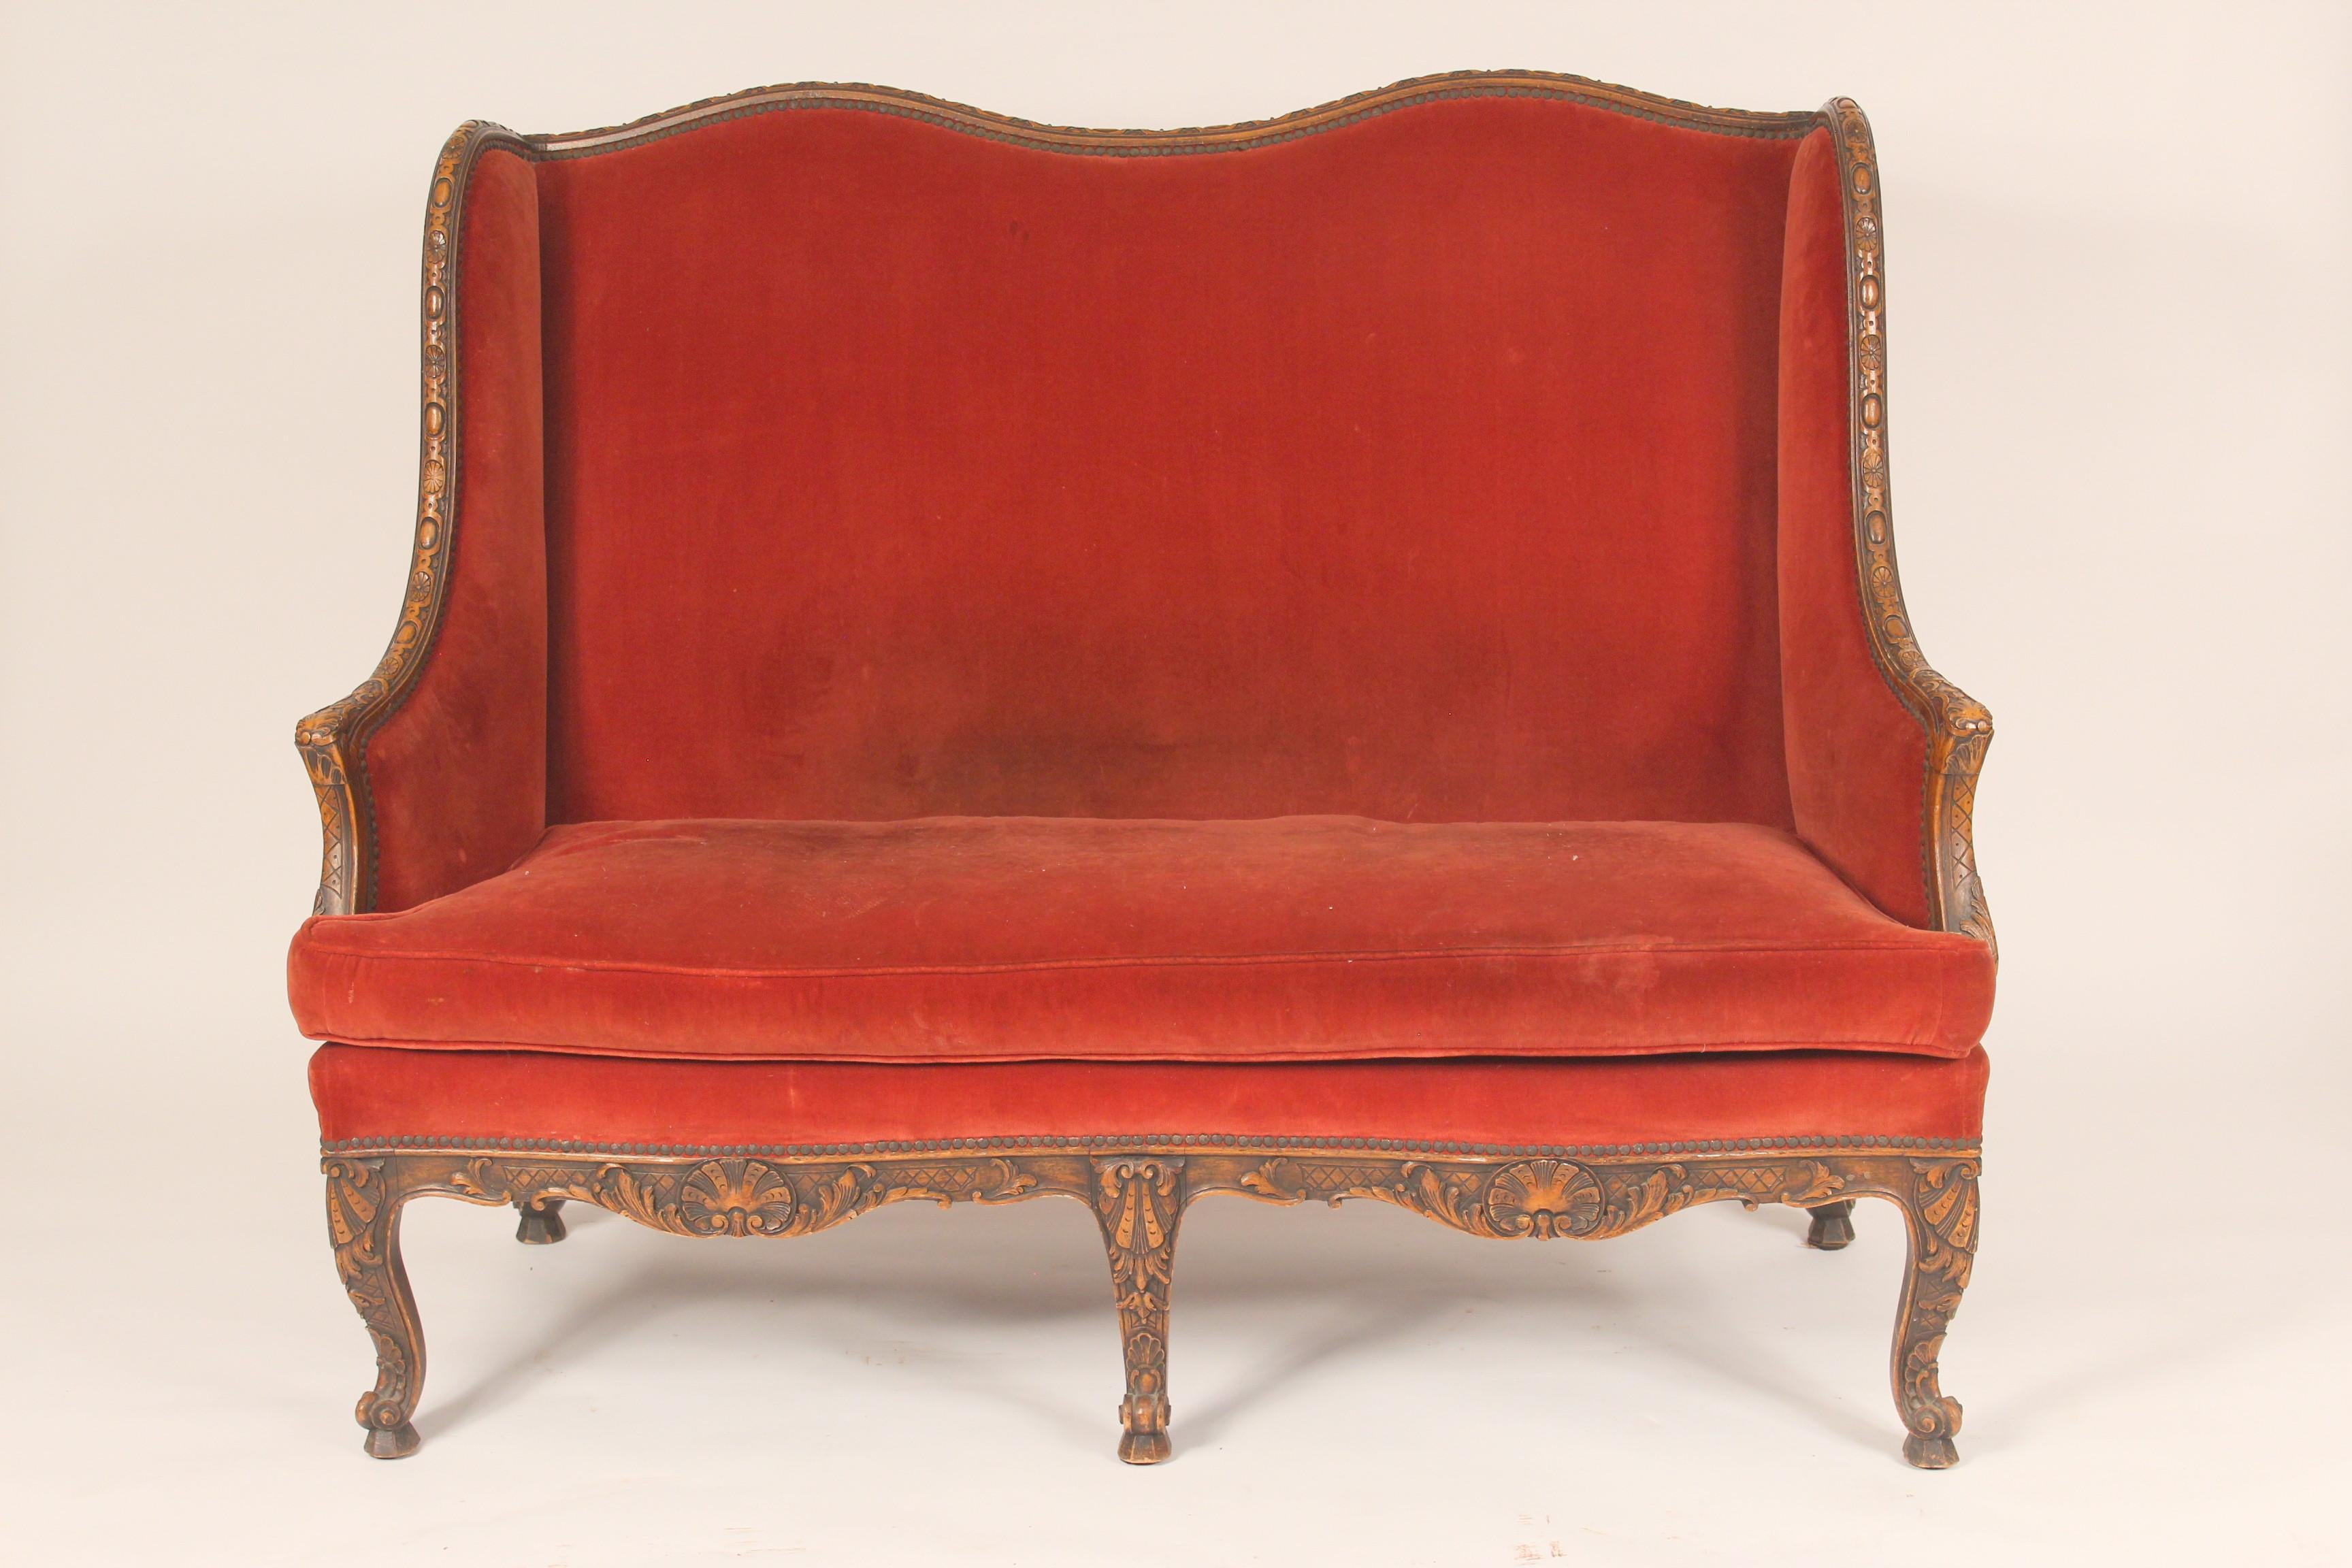 Antique French regence style carved beech wood settee, late 19th century.